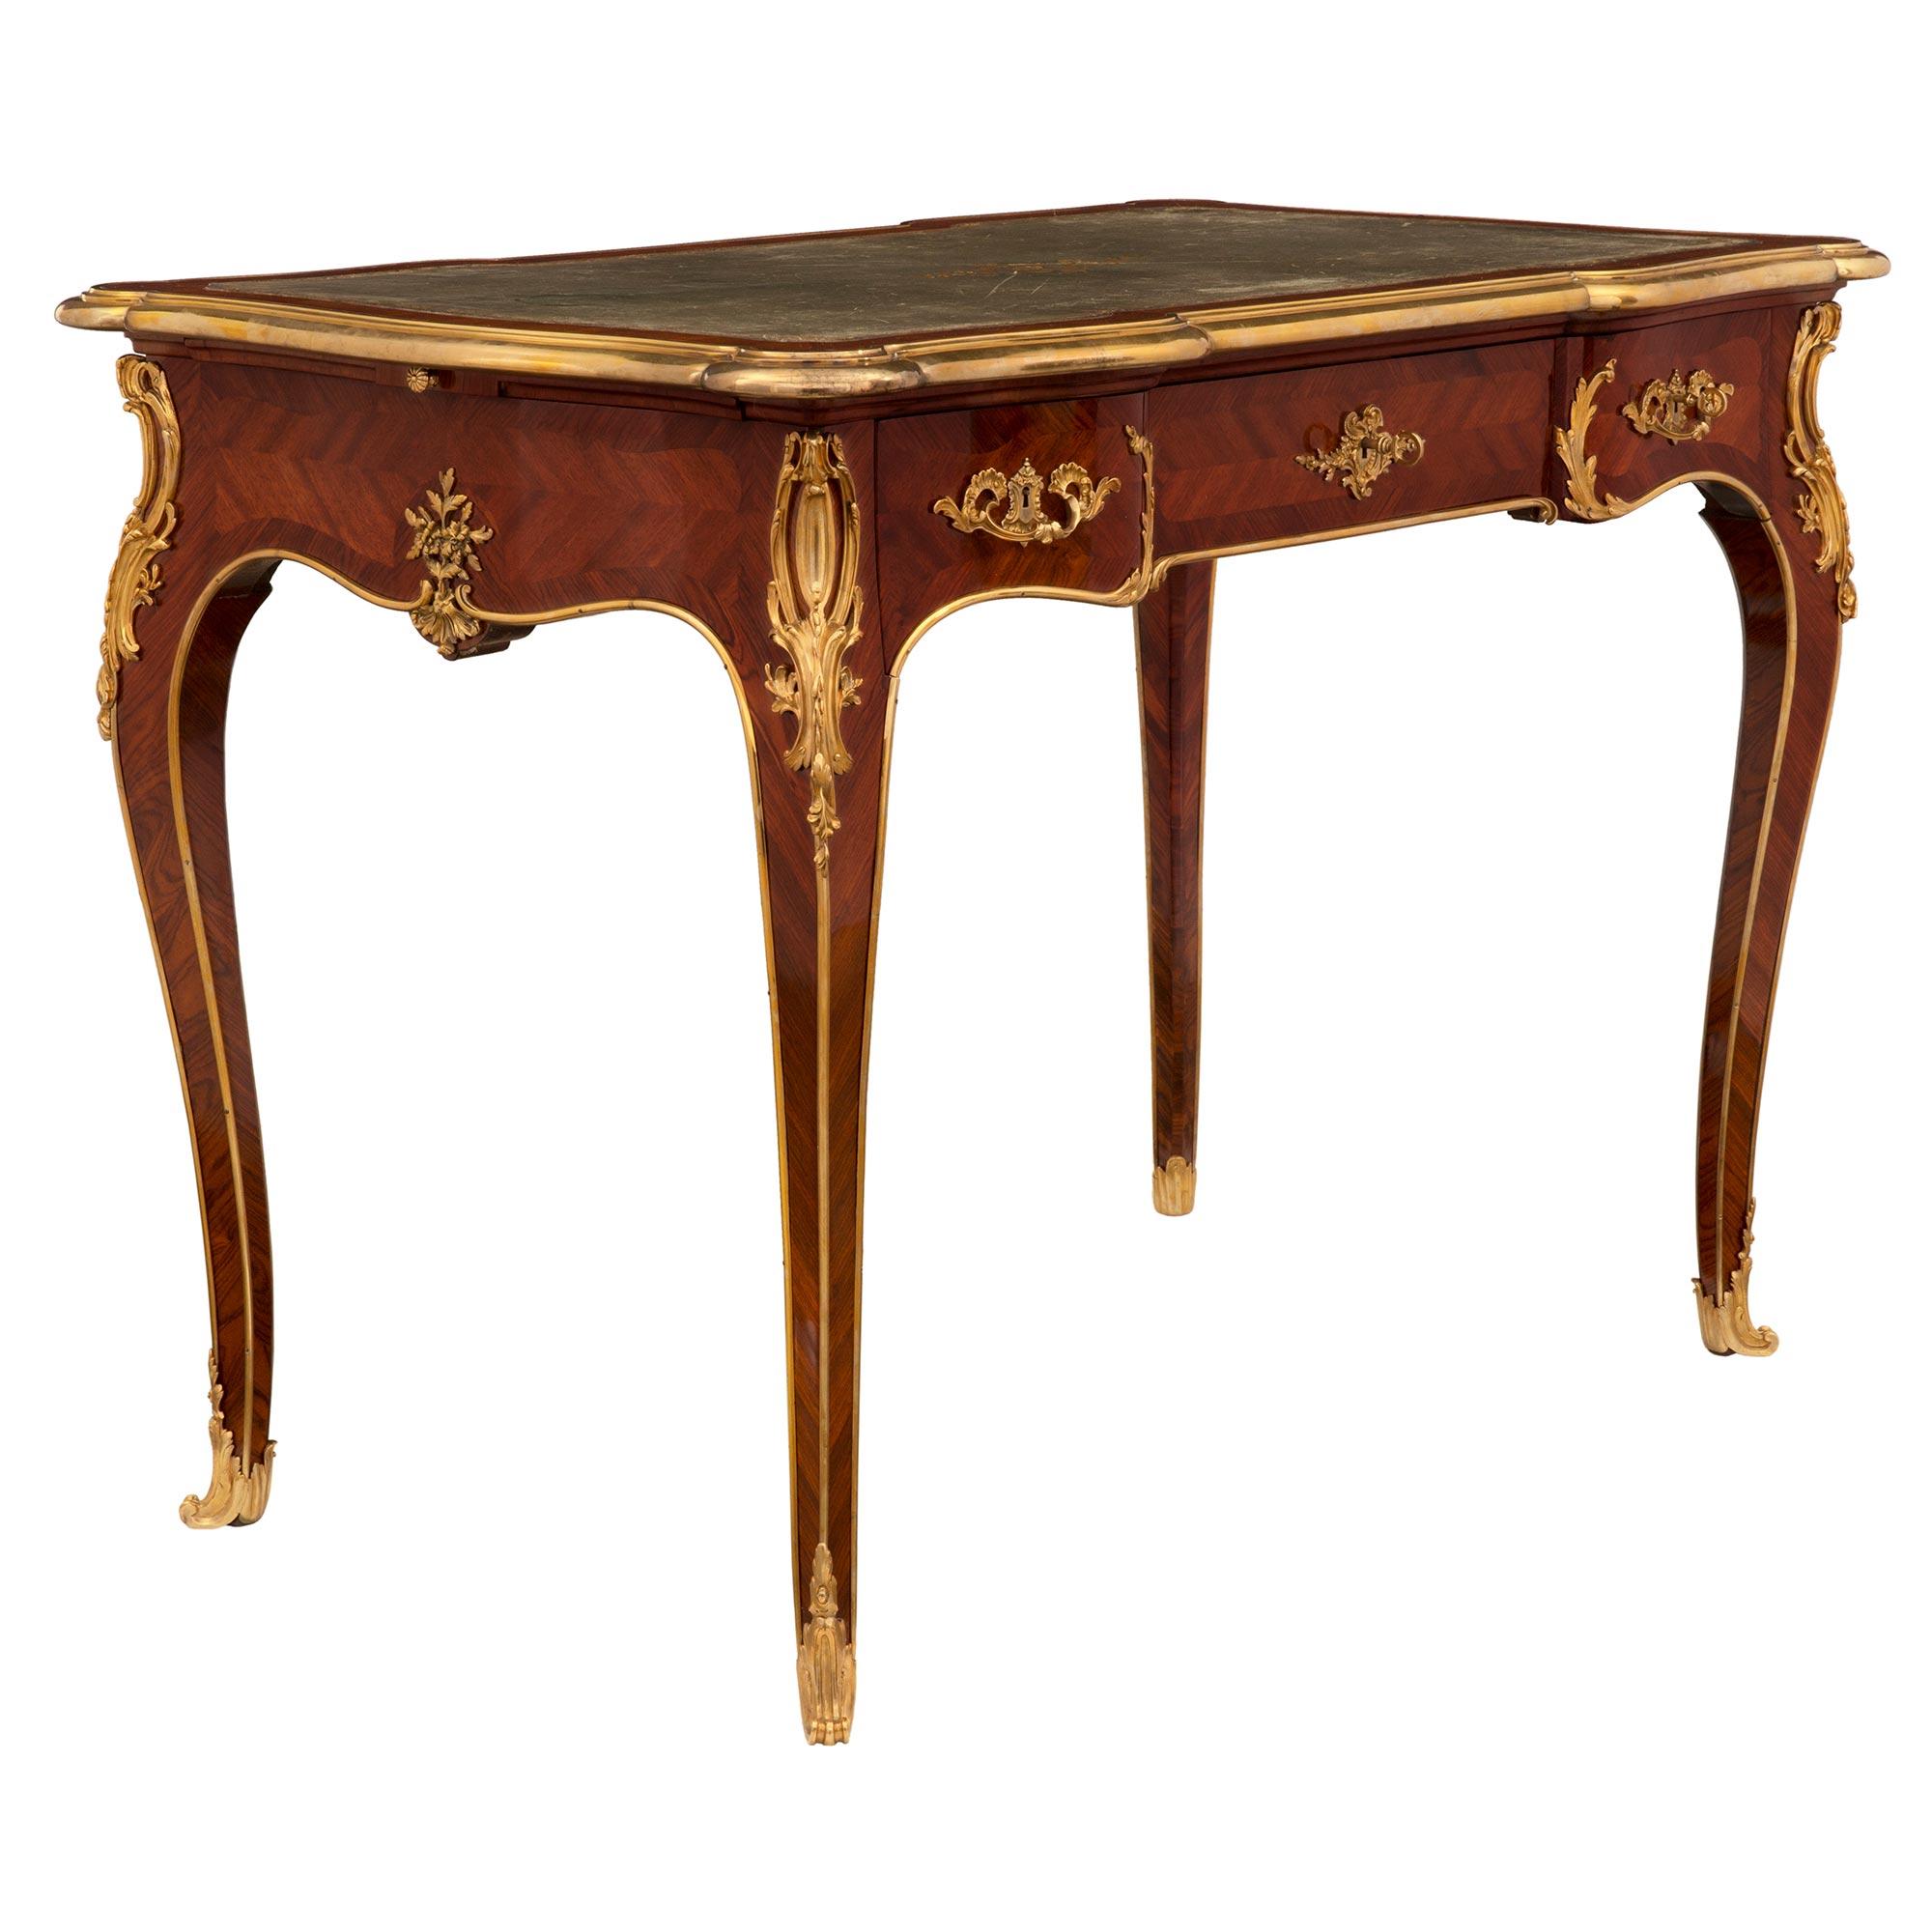 French Mid-19th Century Louis XV Style Kingwood and Ormolu Bureau Plat In Good Condition For Sale In West Palm Beach, FL